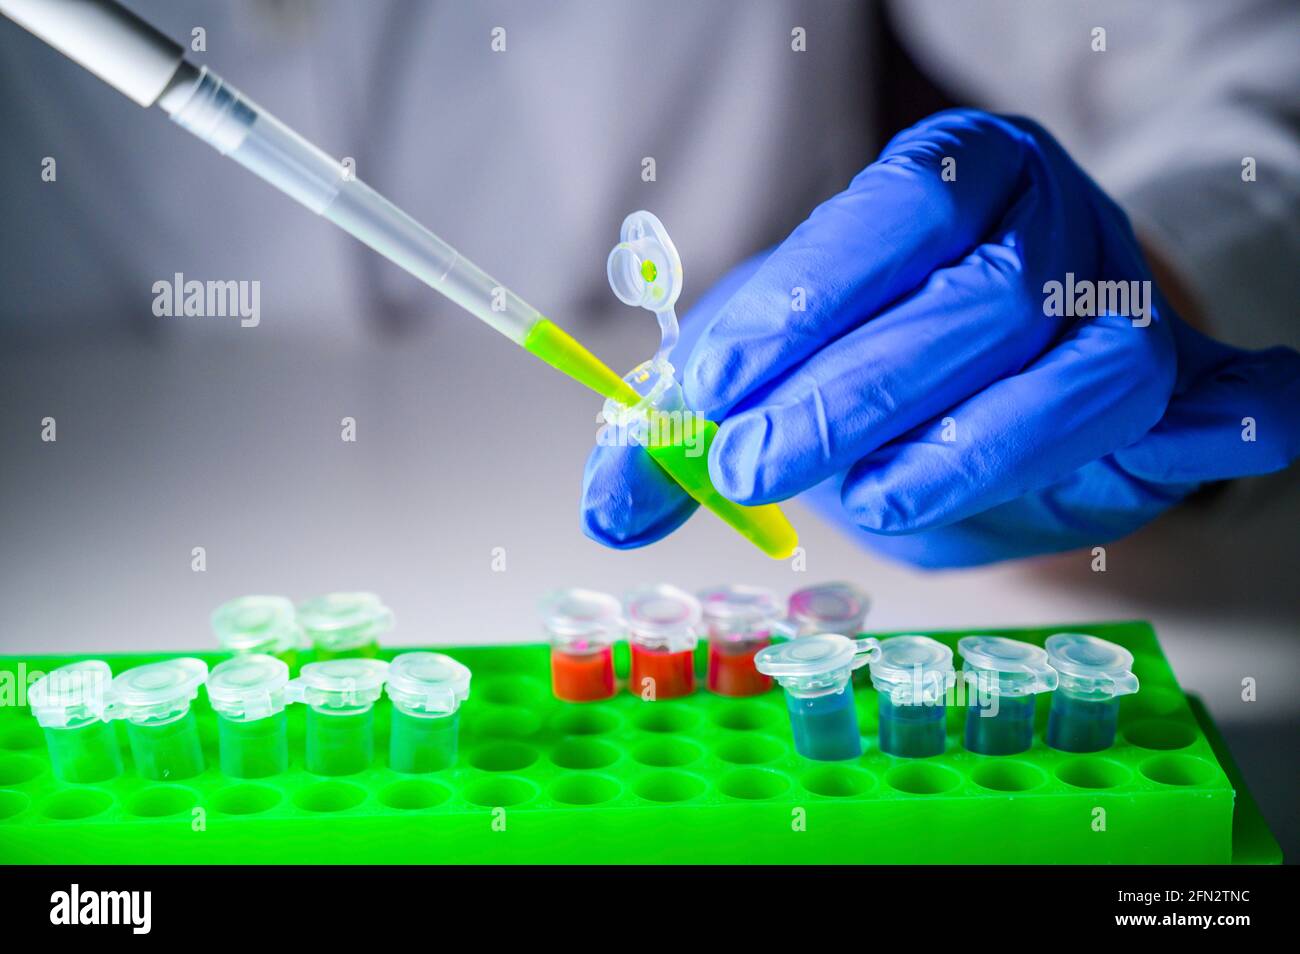 Scientist working with green solution in eppendorf tube and pipette for biomedical research with tube rack on a white bench background Stock Photo